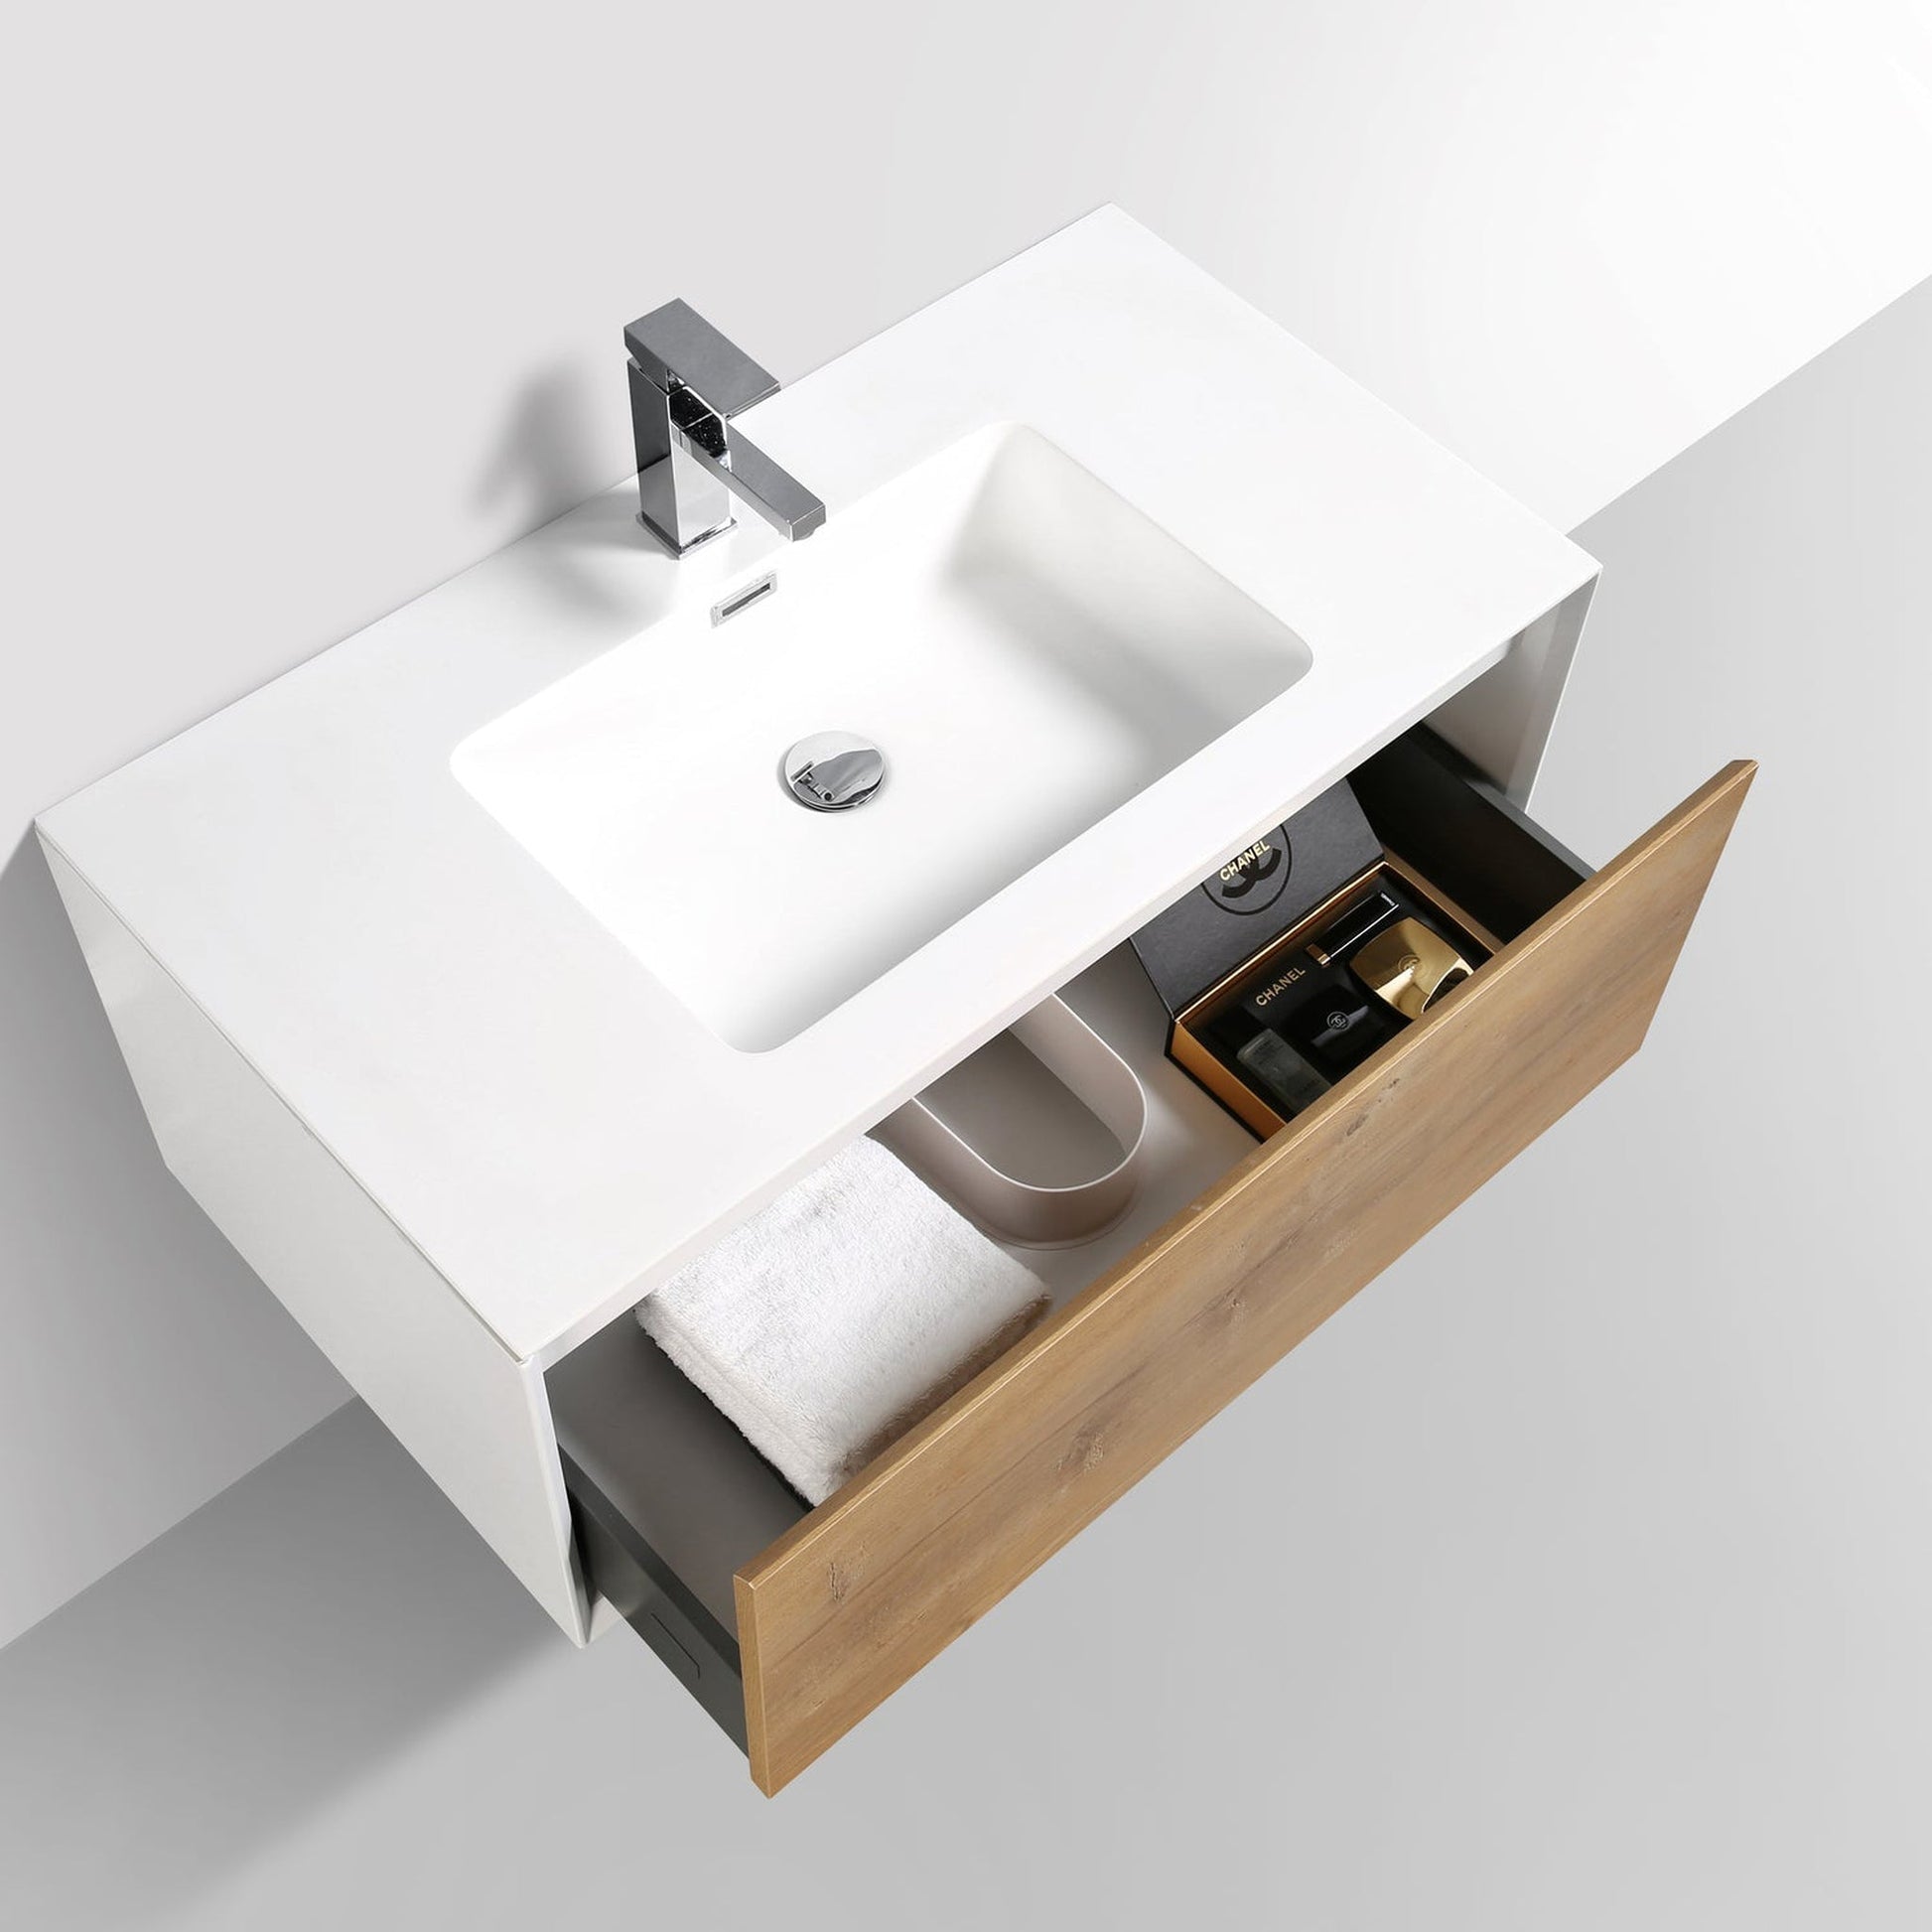 Eviva Vienna 75 Wall Mount Double Sink Bathroom Vanity with Black Integrated Acrylic Top, White Oak